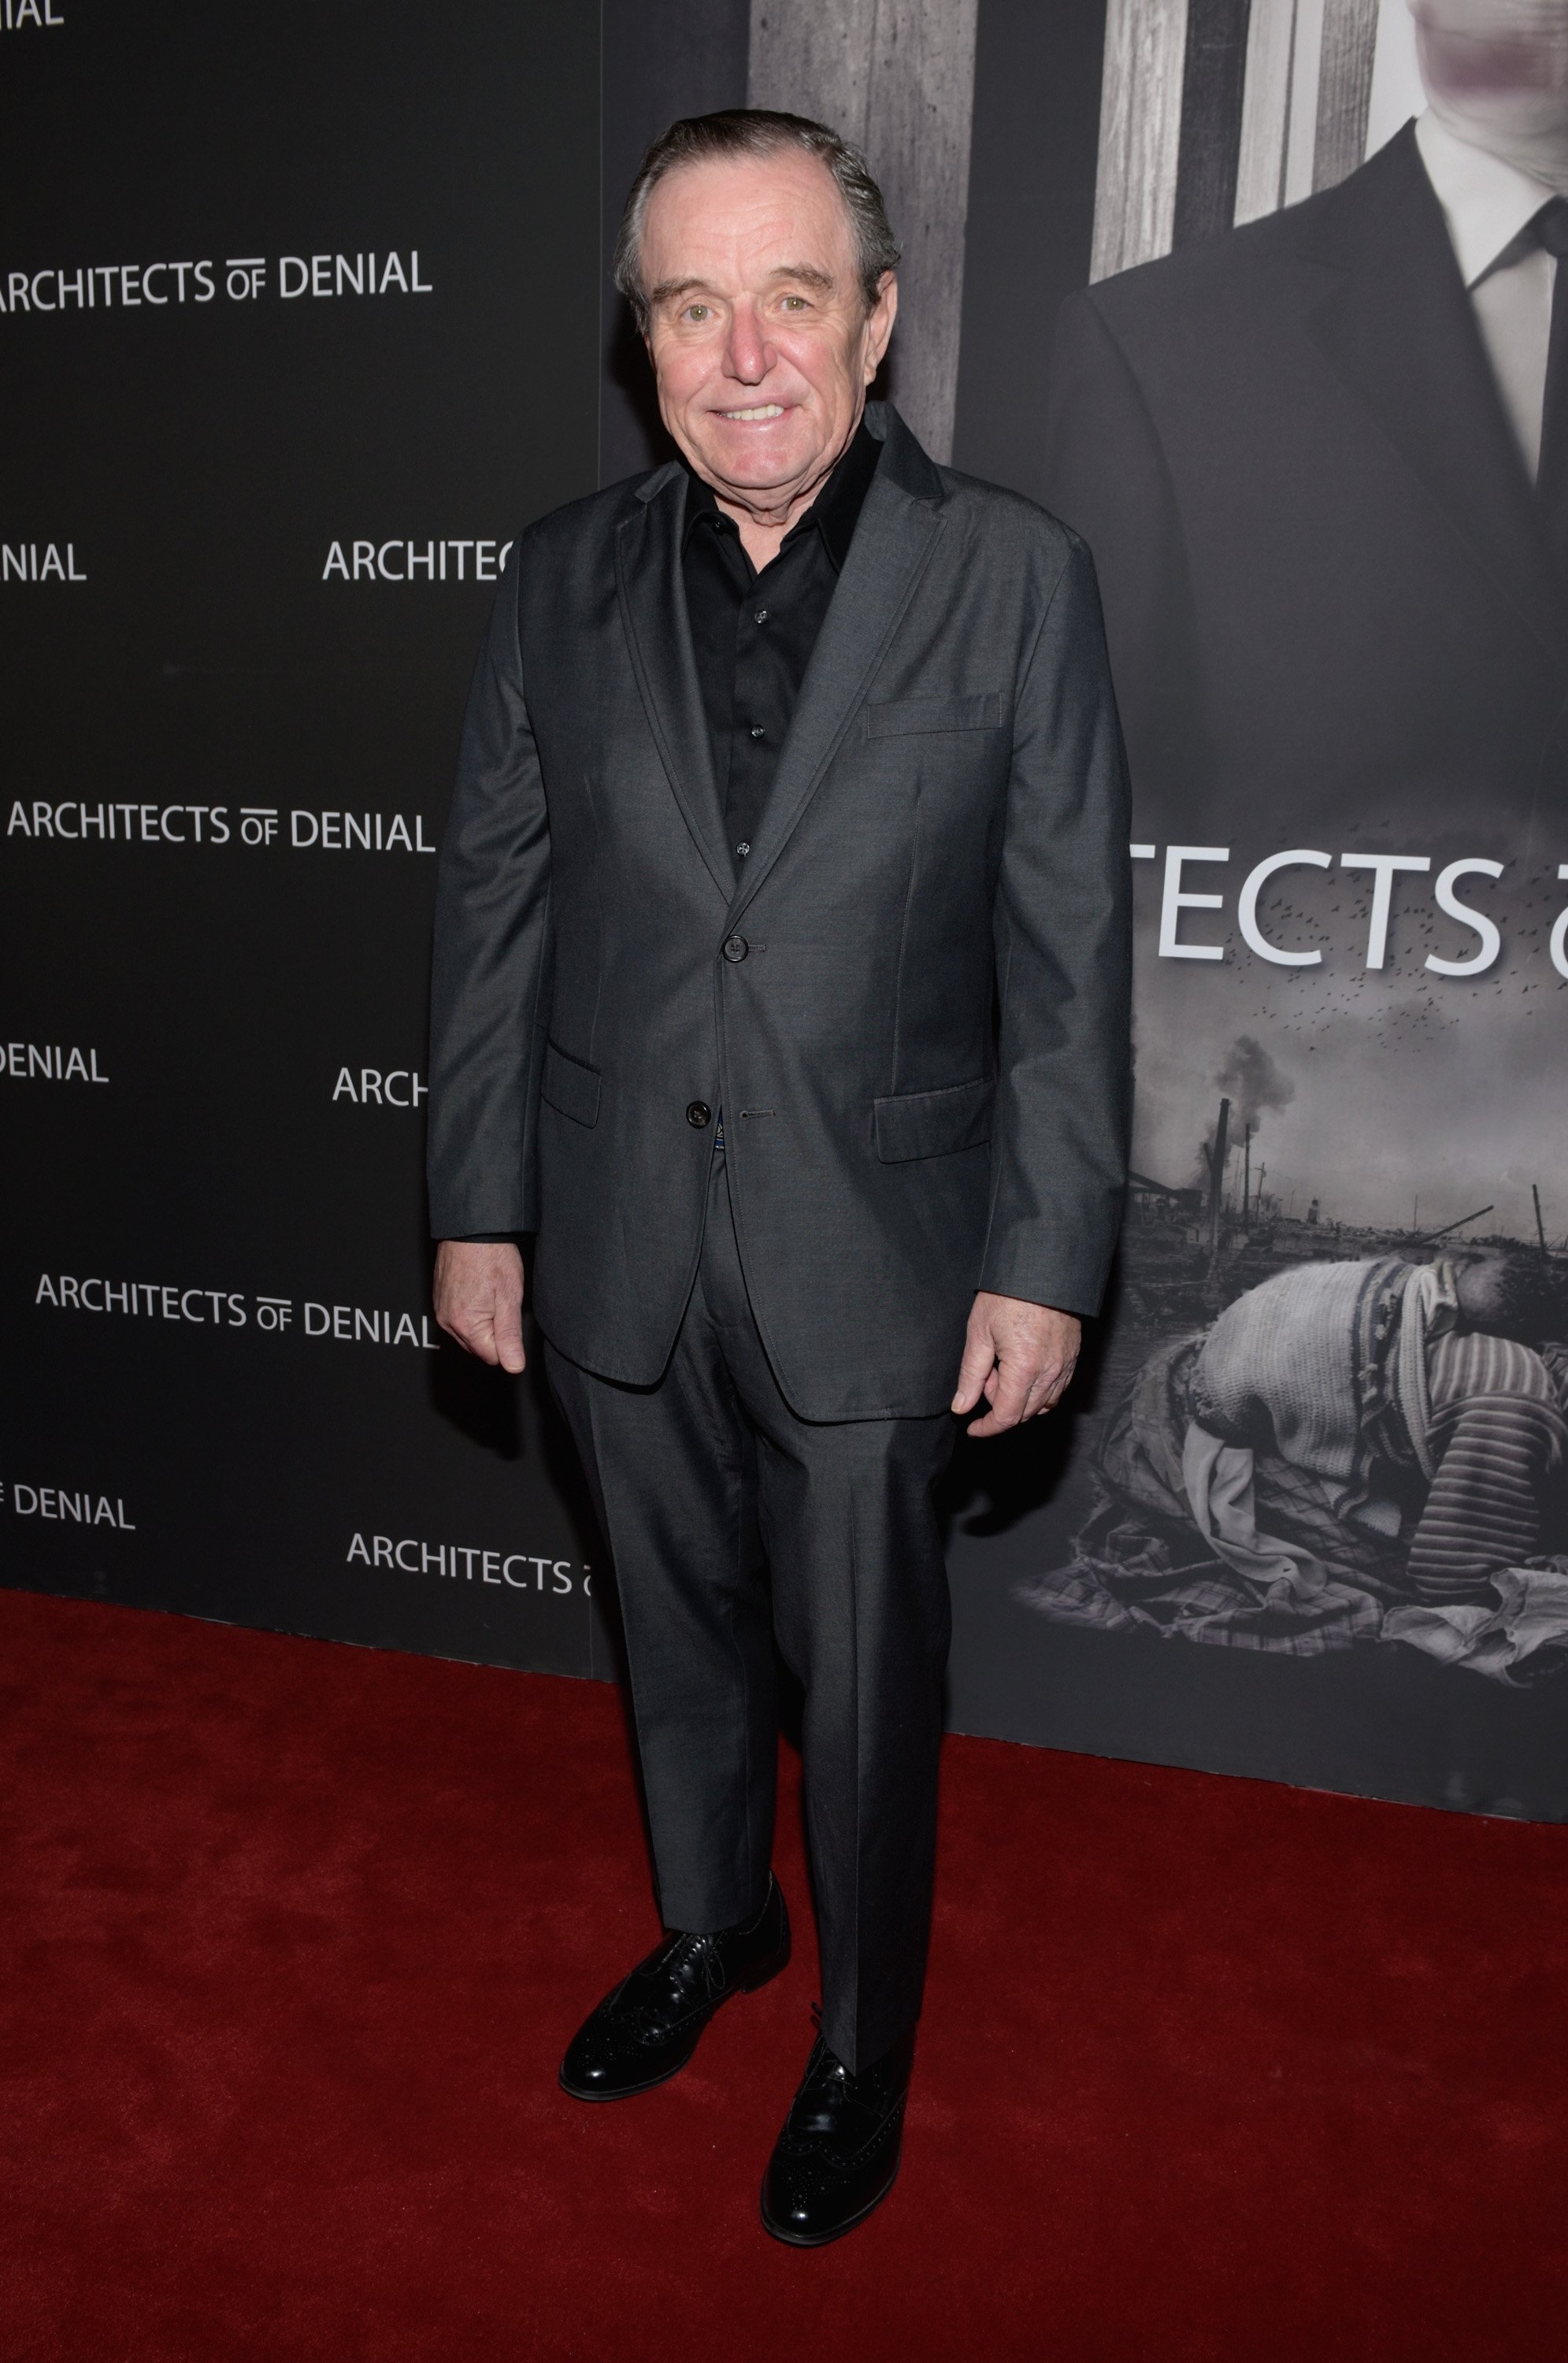 Jerry Mathers attends the premiere of 'Architects Of Denial' at Taglyan Complex on October 3, 2017 | Photo: GettyImages